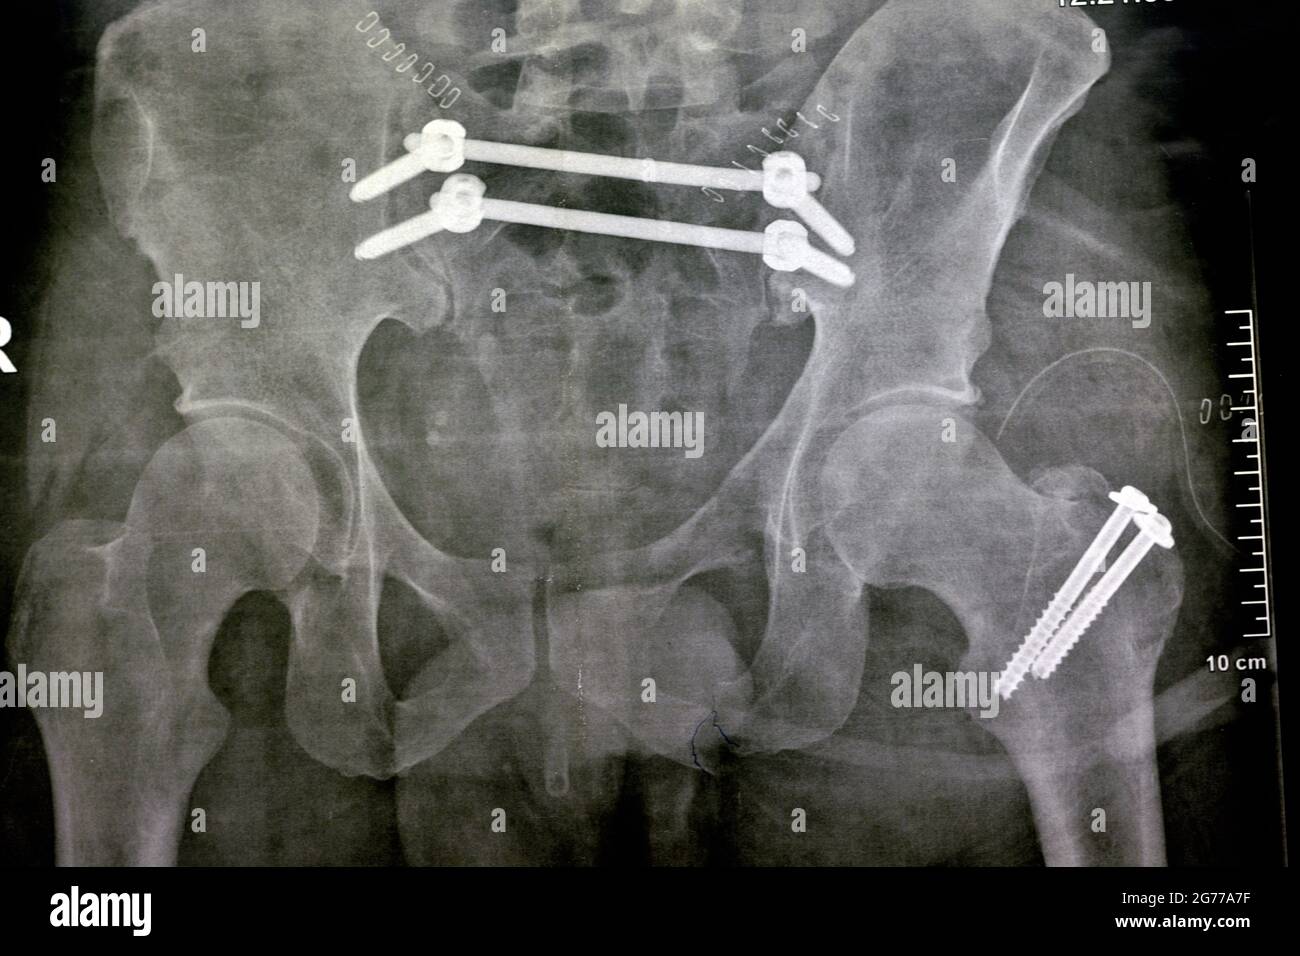 Plain x ray with a fracture pelvis that is fixed with 4 screws and 2 rods and fracture of greater trochanter of femur fixed with 2 screws Stock Photo